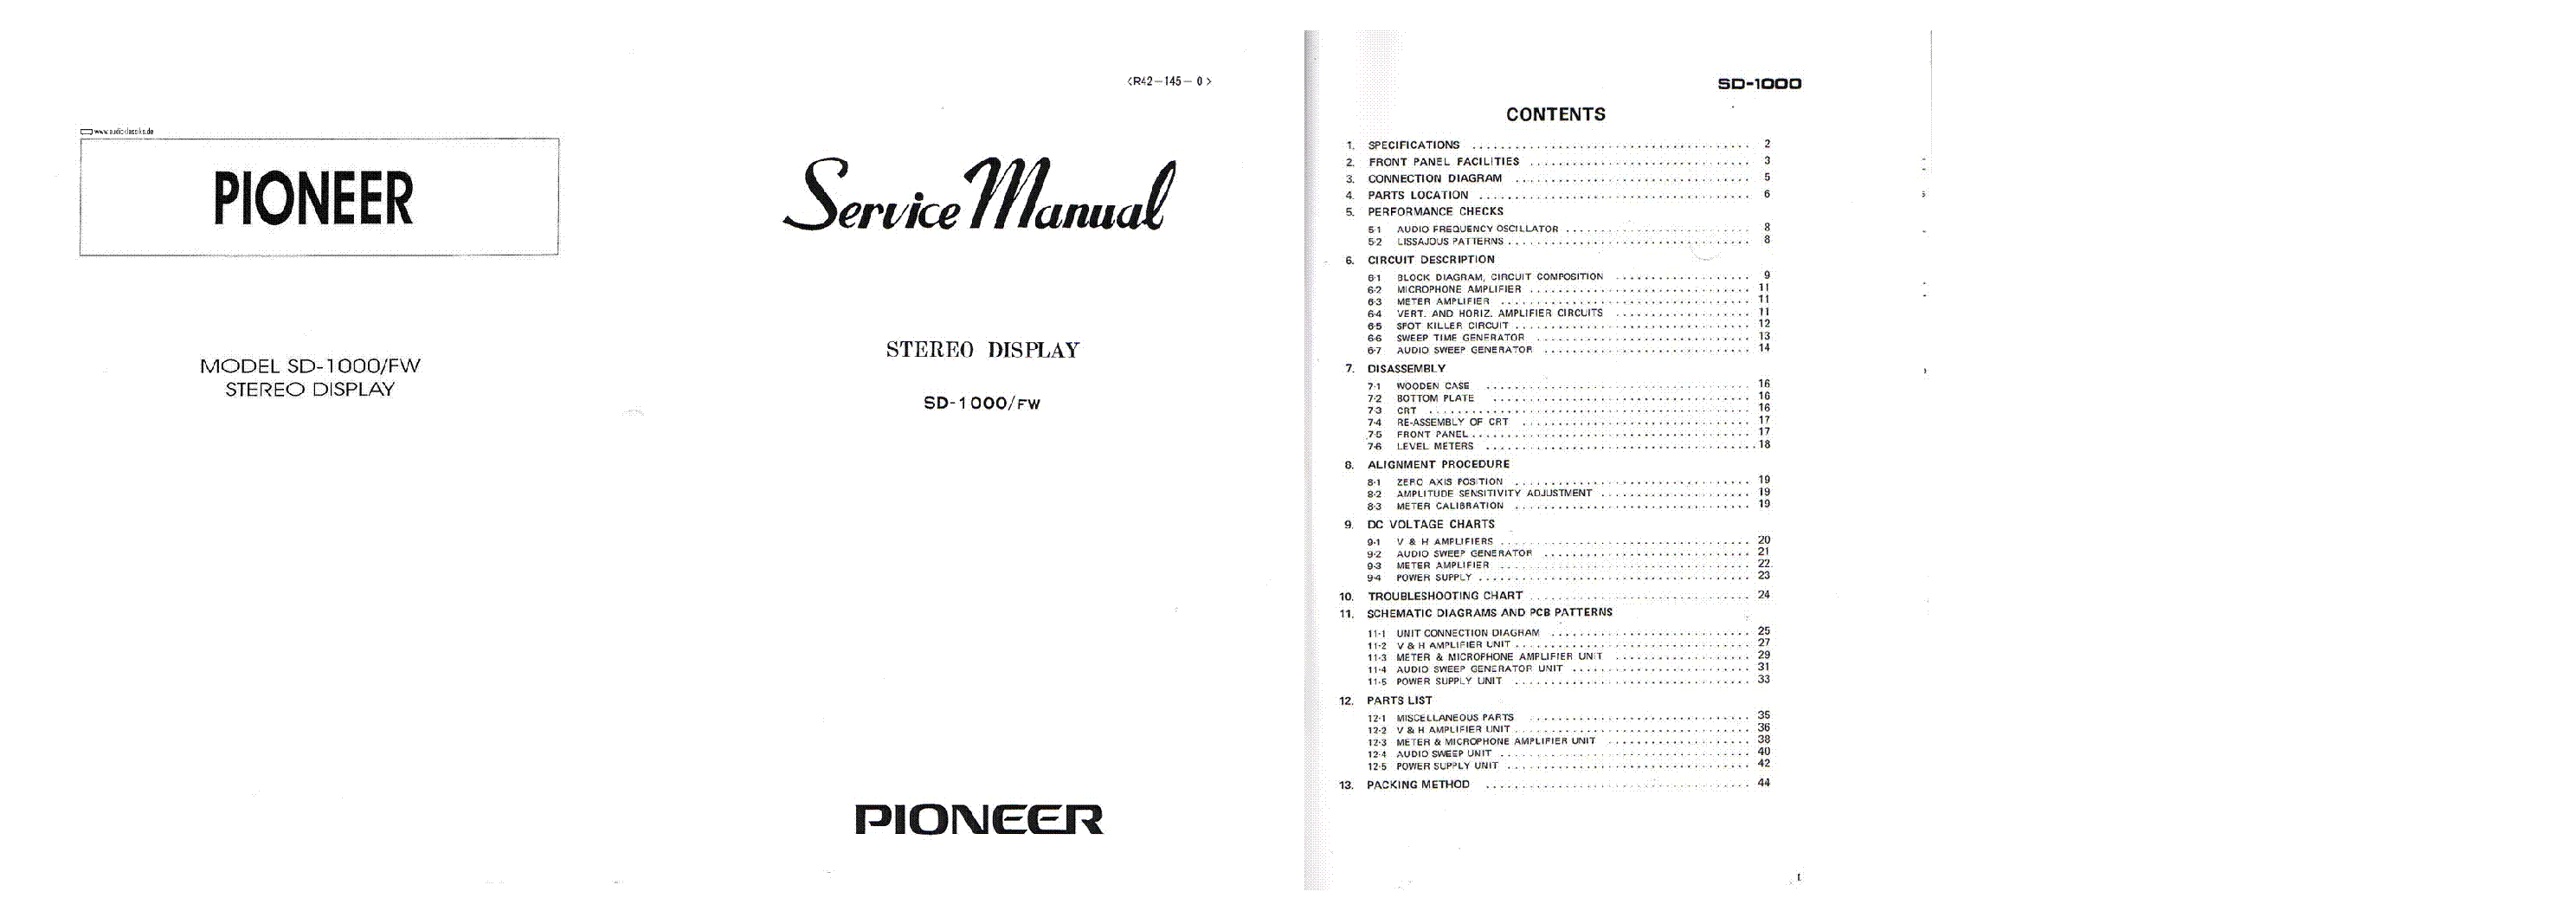 PIONEER SD-1000 SM service manual (1st page)